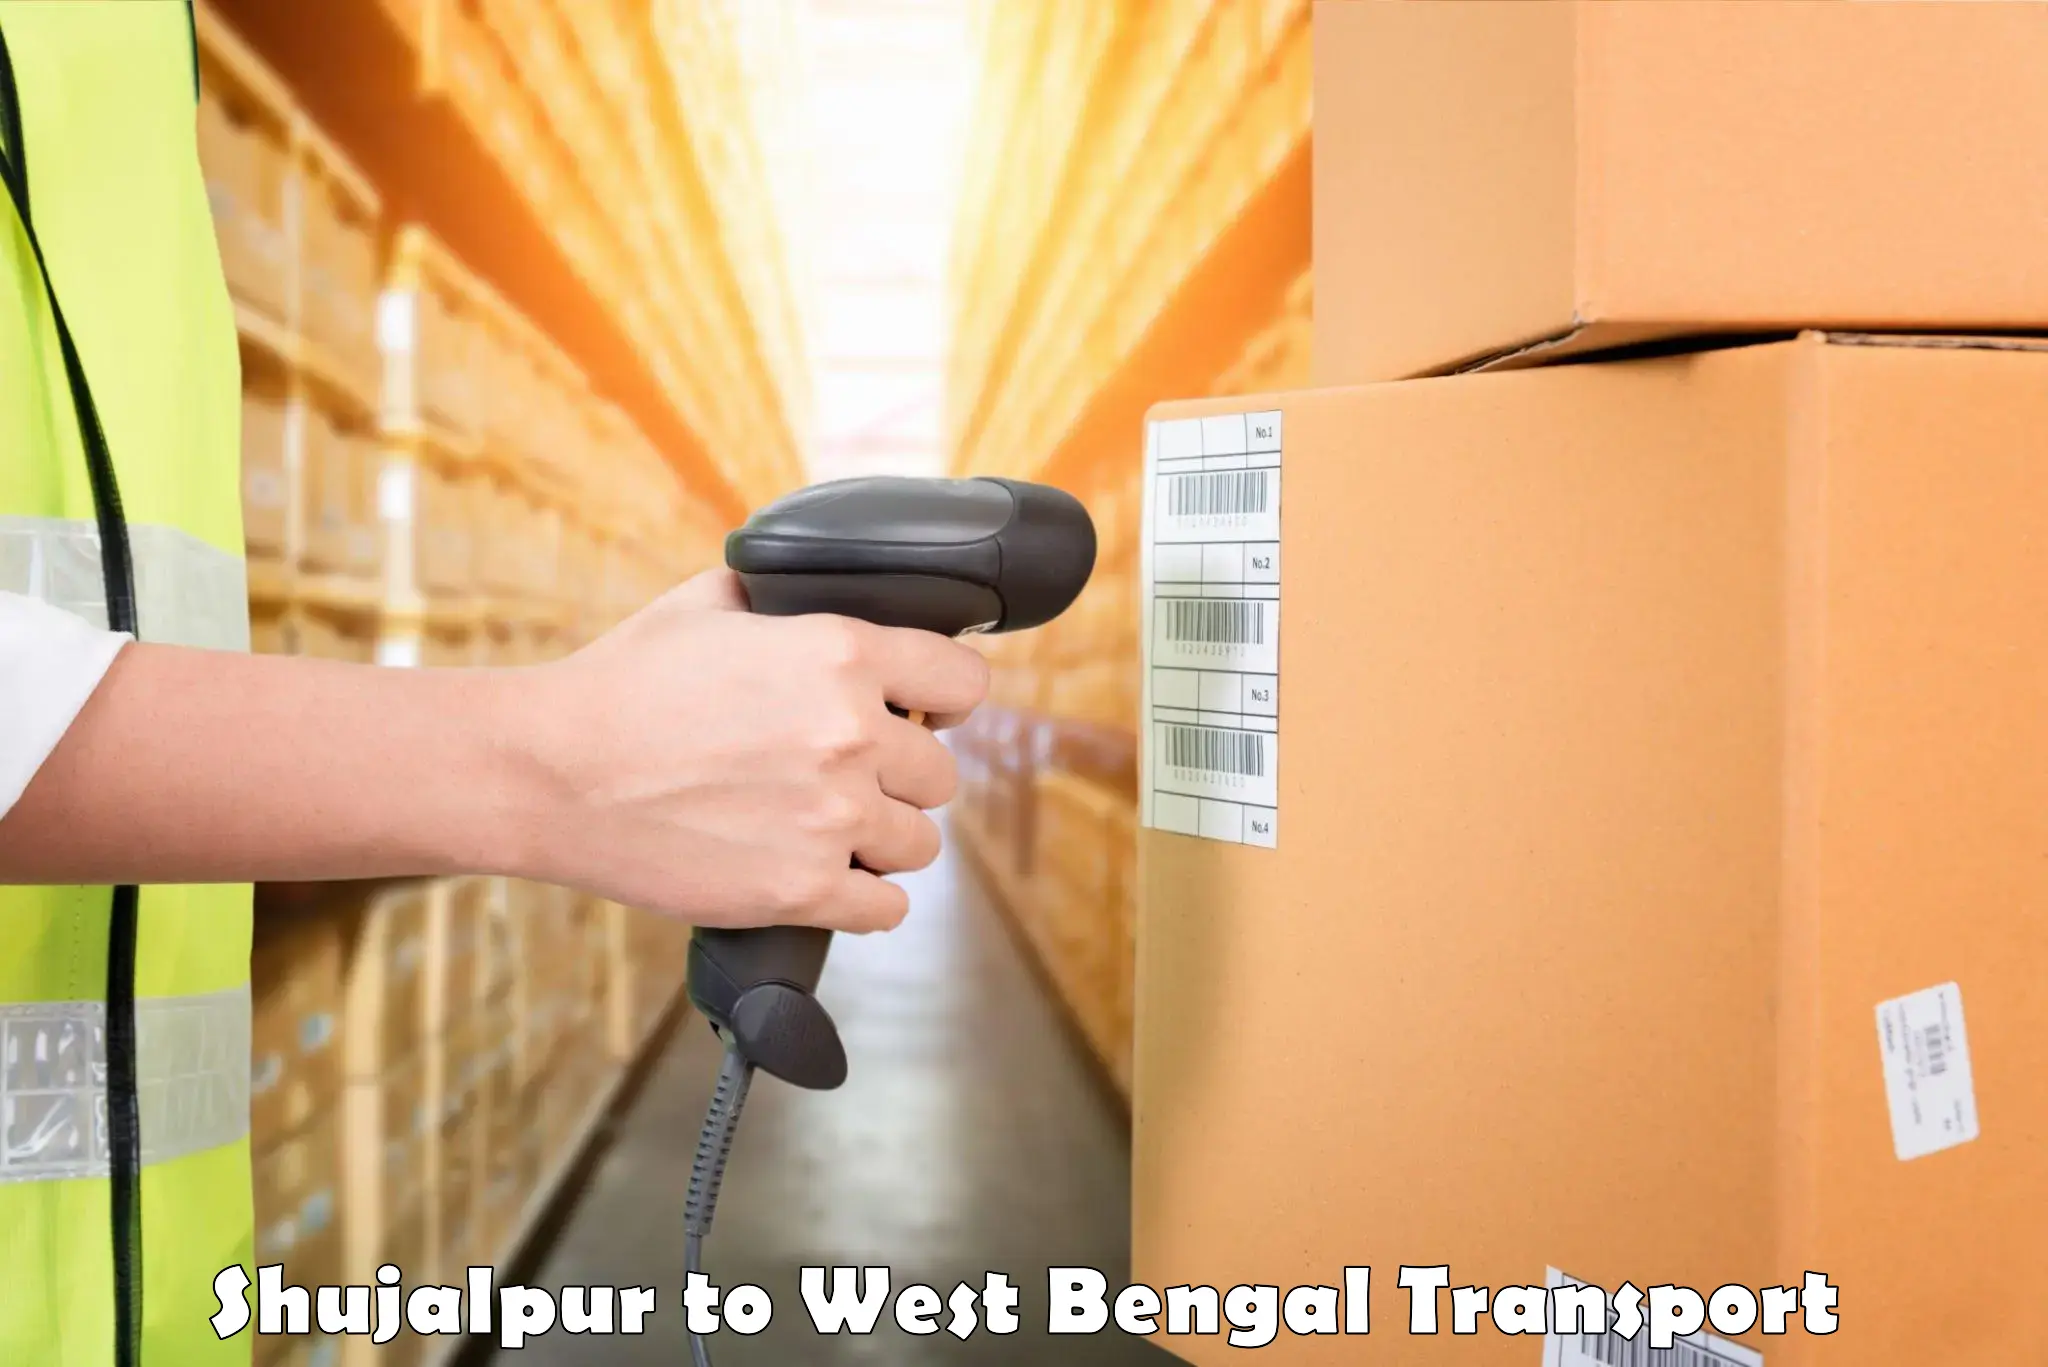 Truck transport companies in India Shujalpur to West Bengal